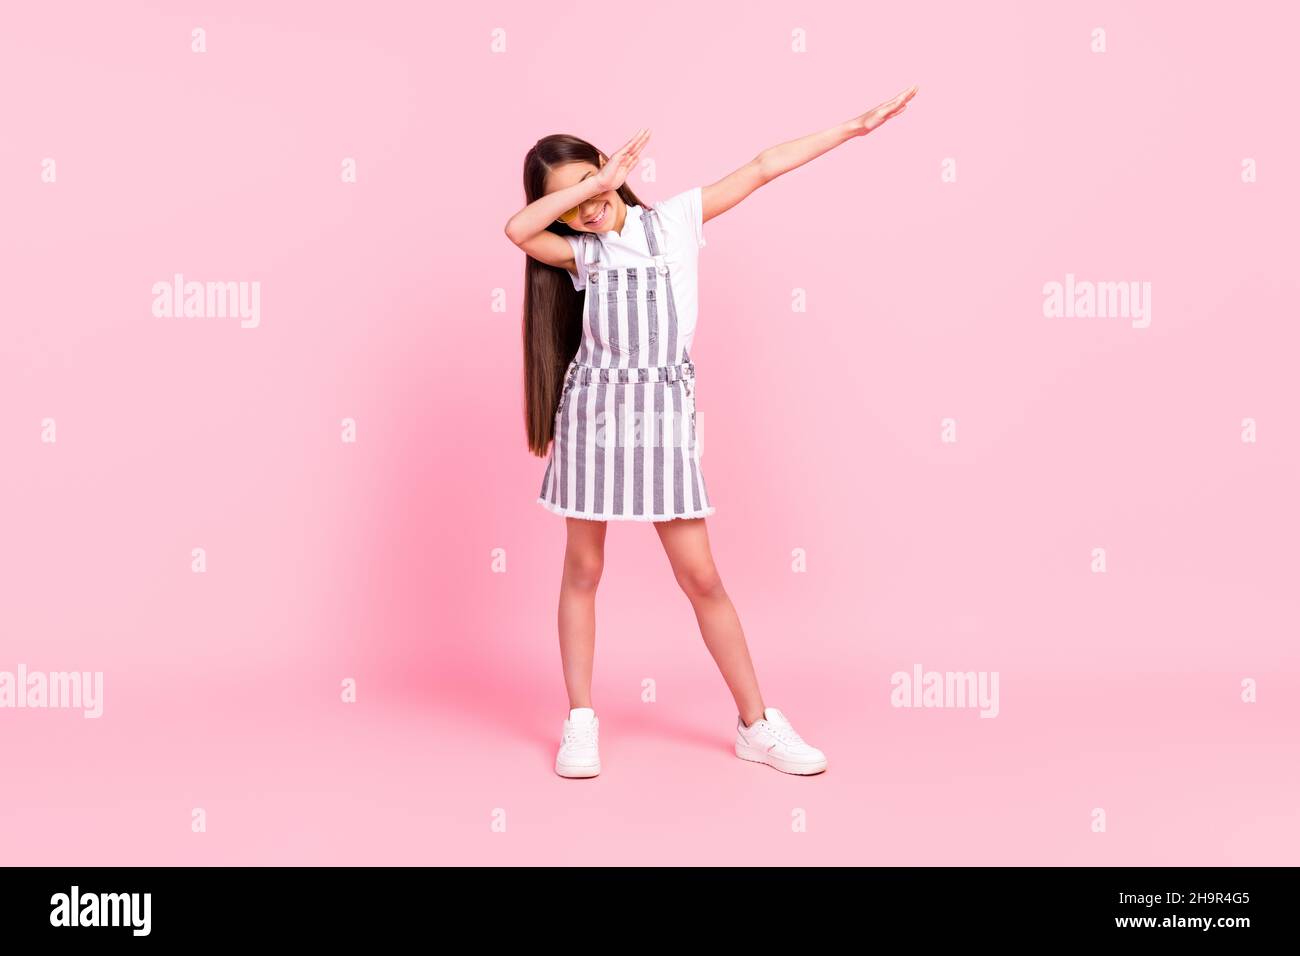 full length body size photo schoolgirl overall showing dab sign dancing isolated pastel pink color background 2H9R4G5